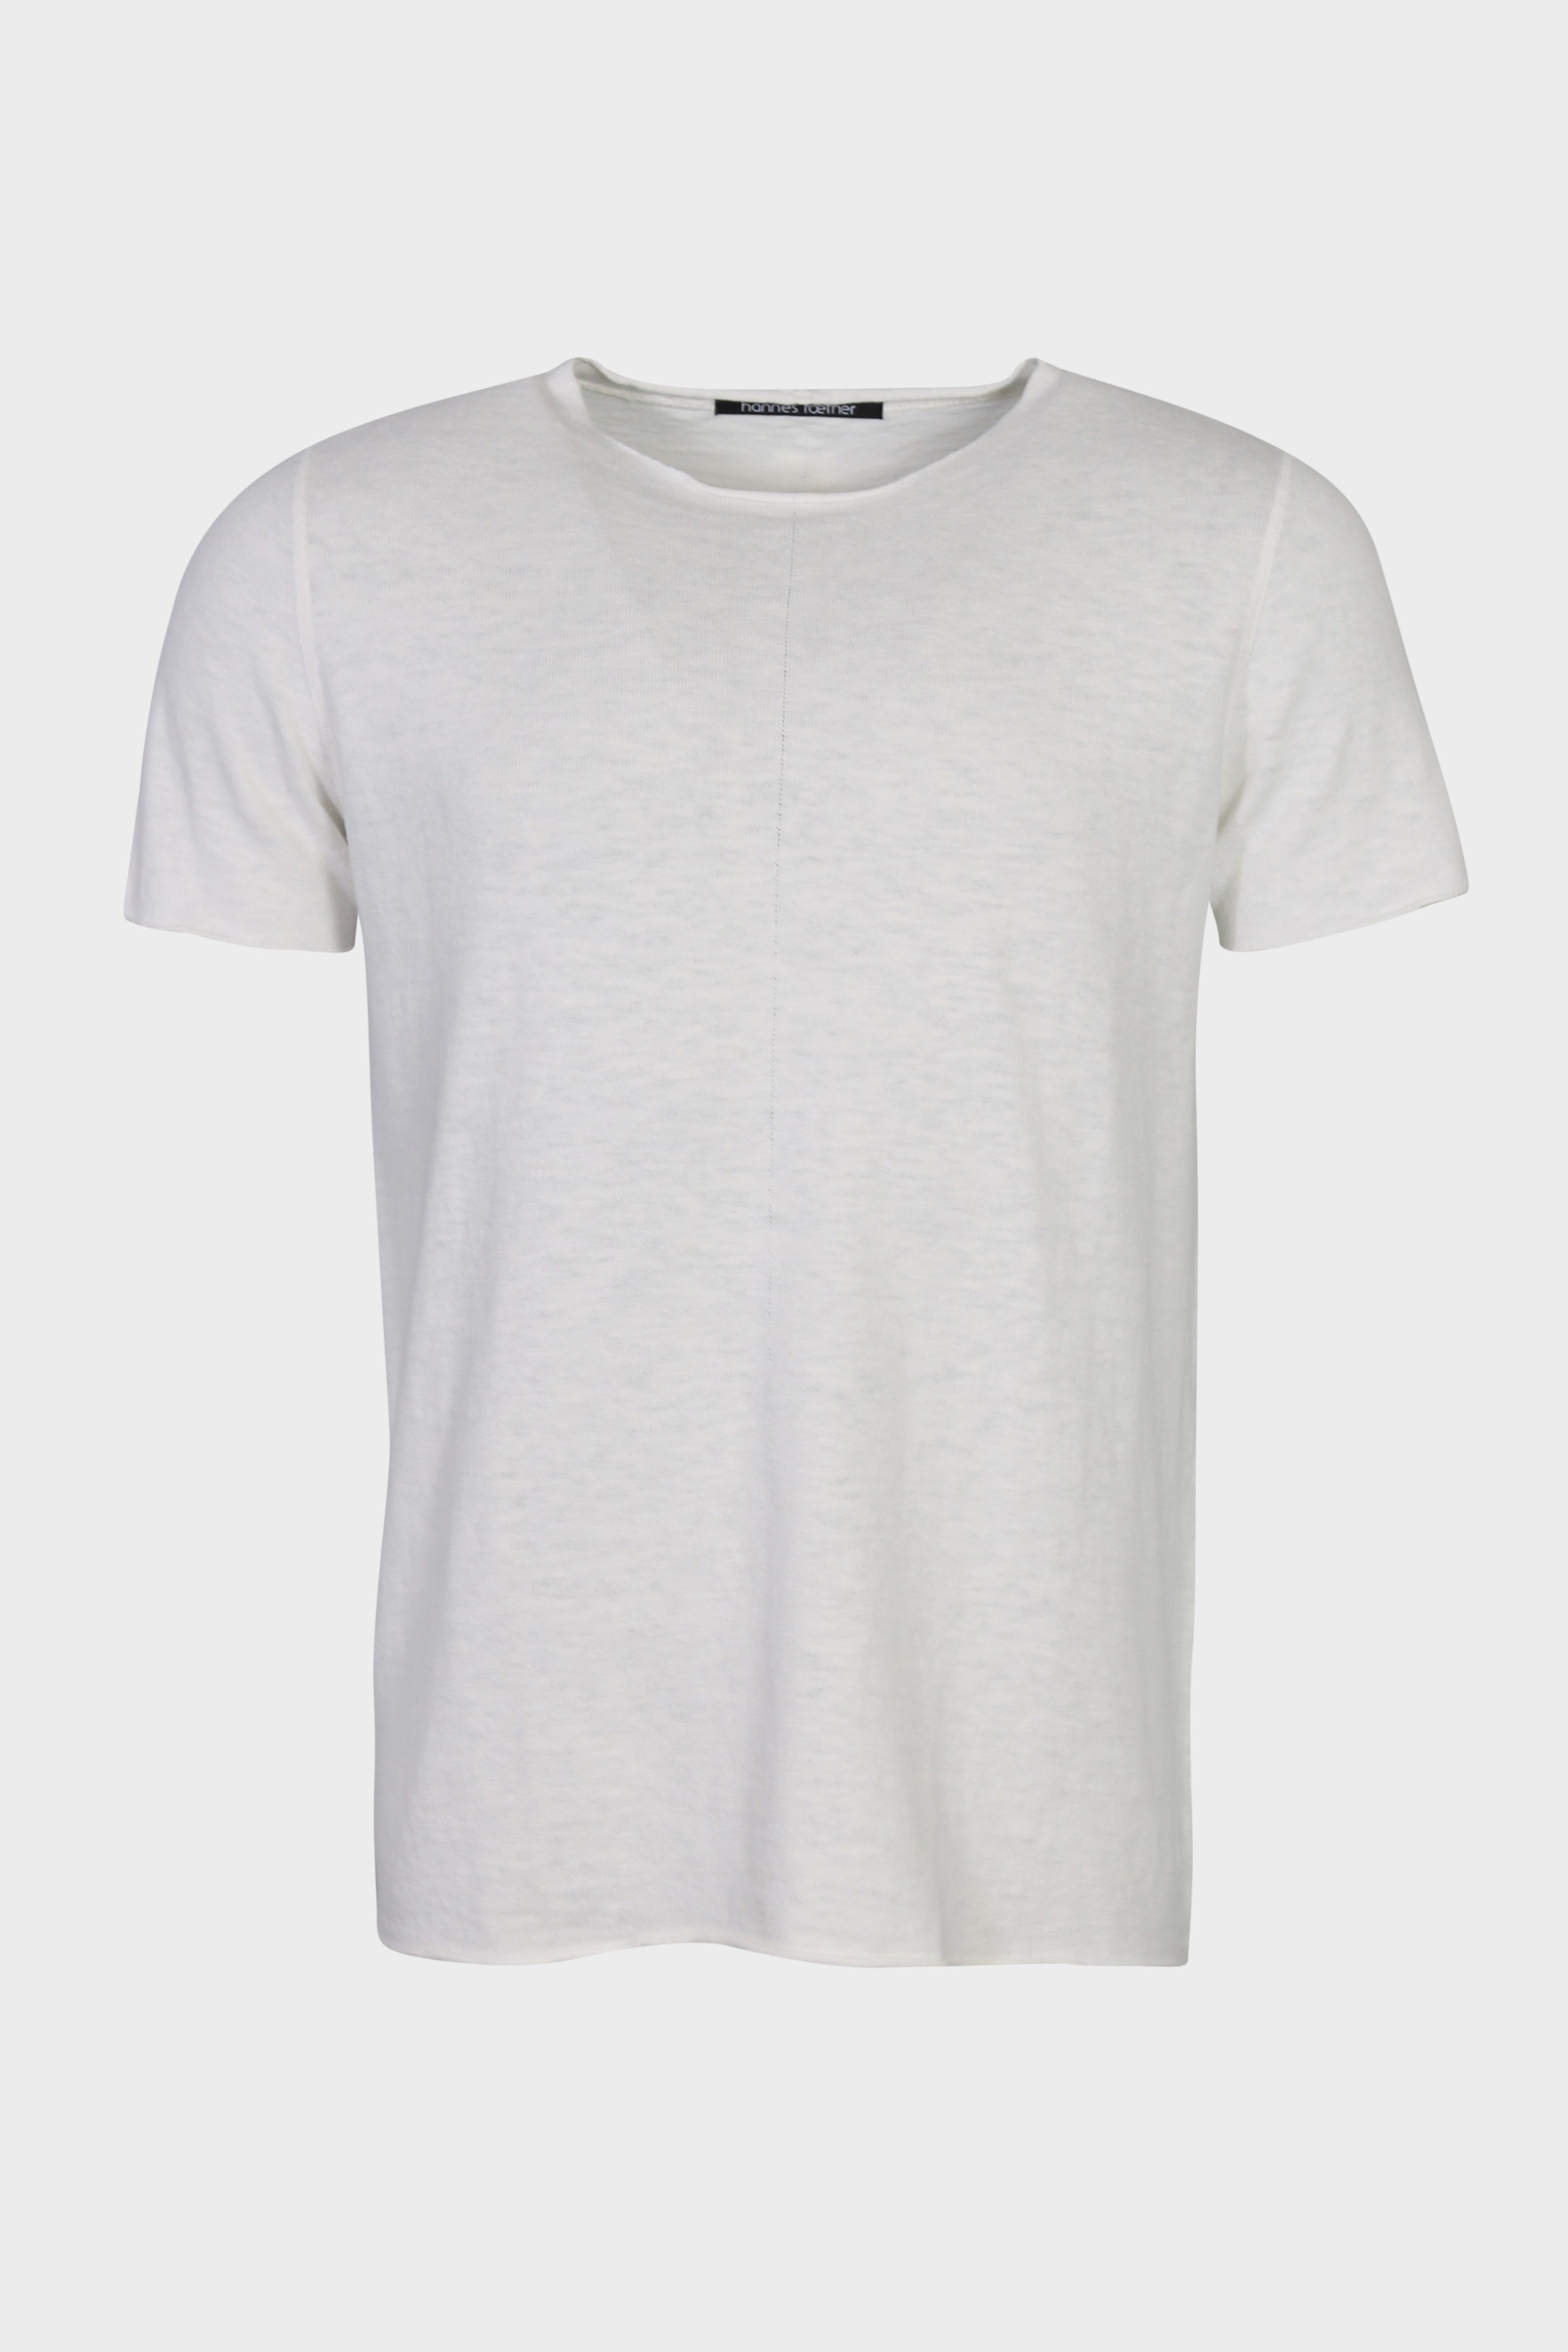 HANNES ROETHER Knit T-Shirt in Offwhite